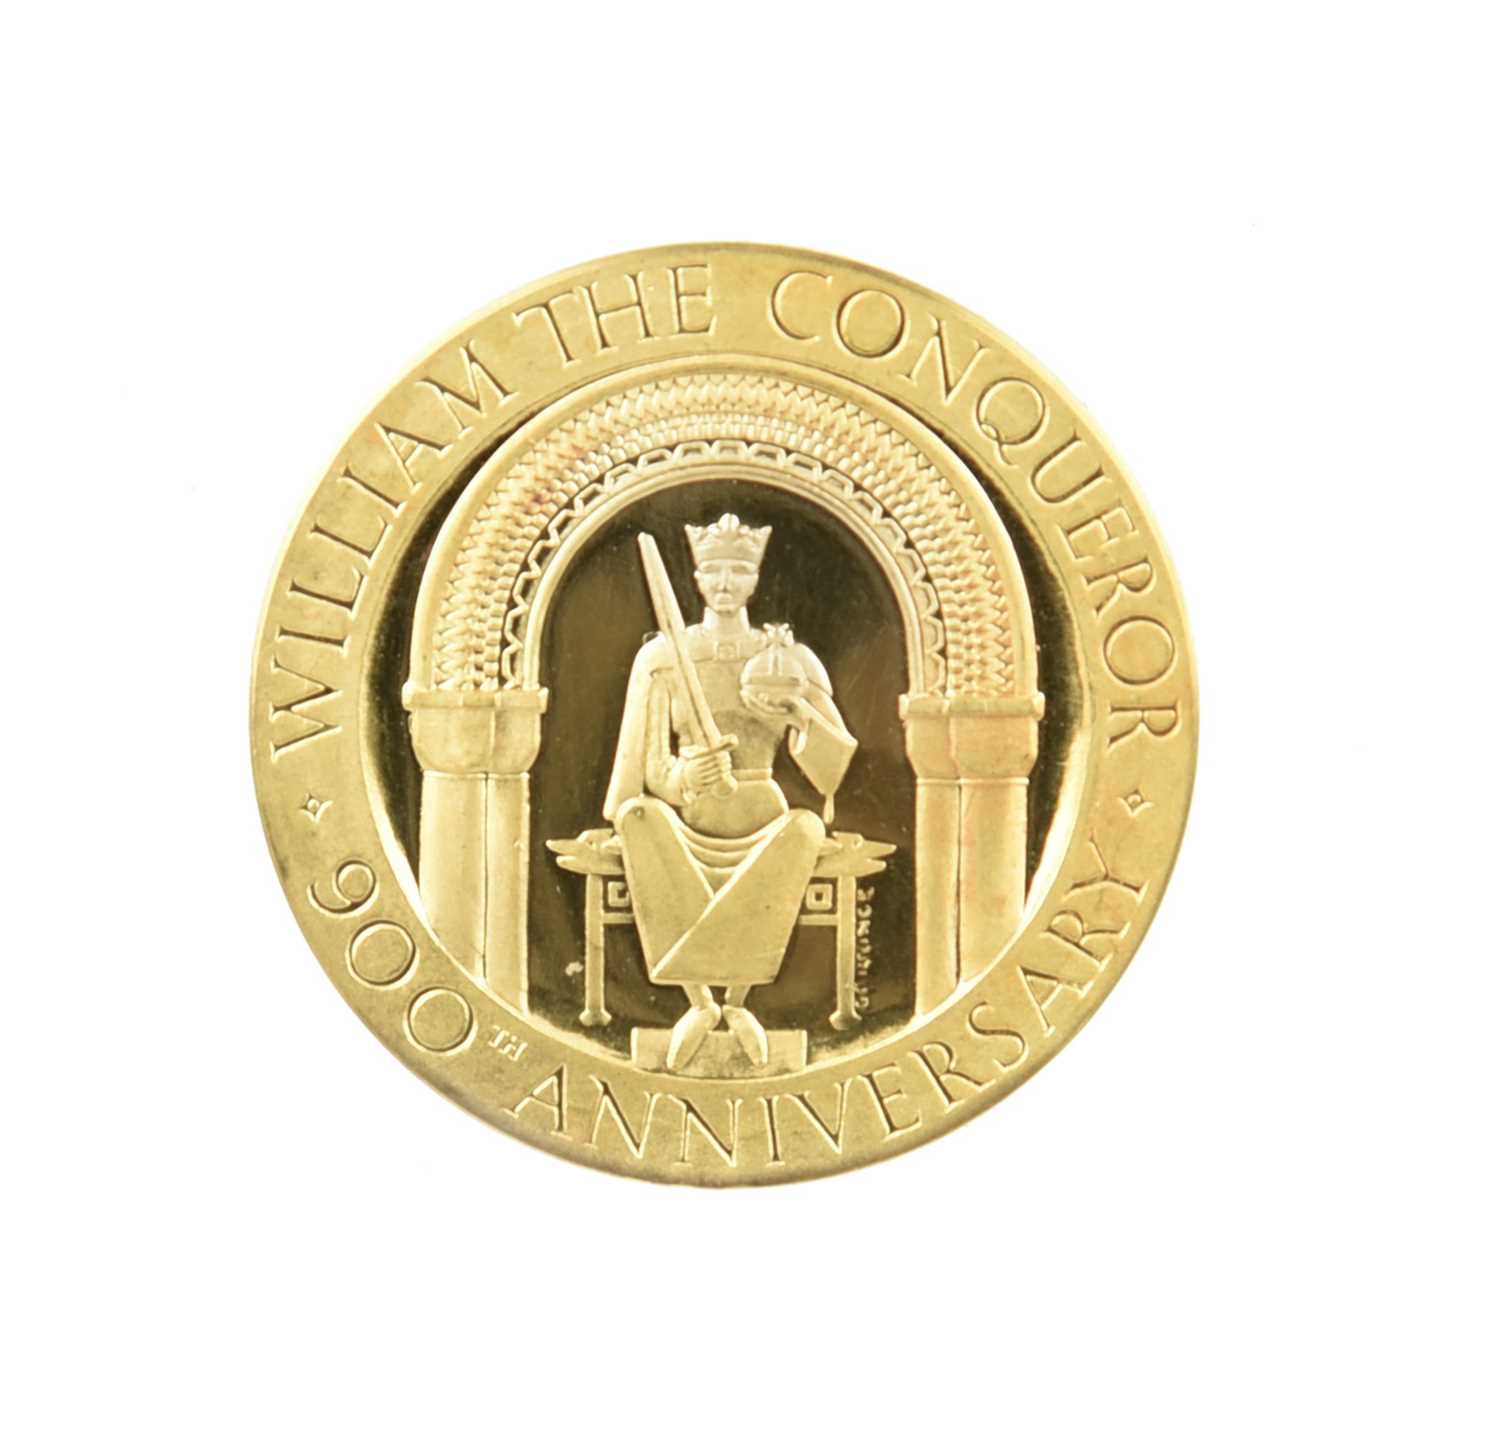 William the Conqueror - 900th Anniversary of the Battle of Hastings, a gold medal by Spink, the